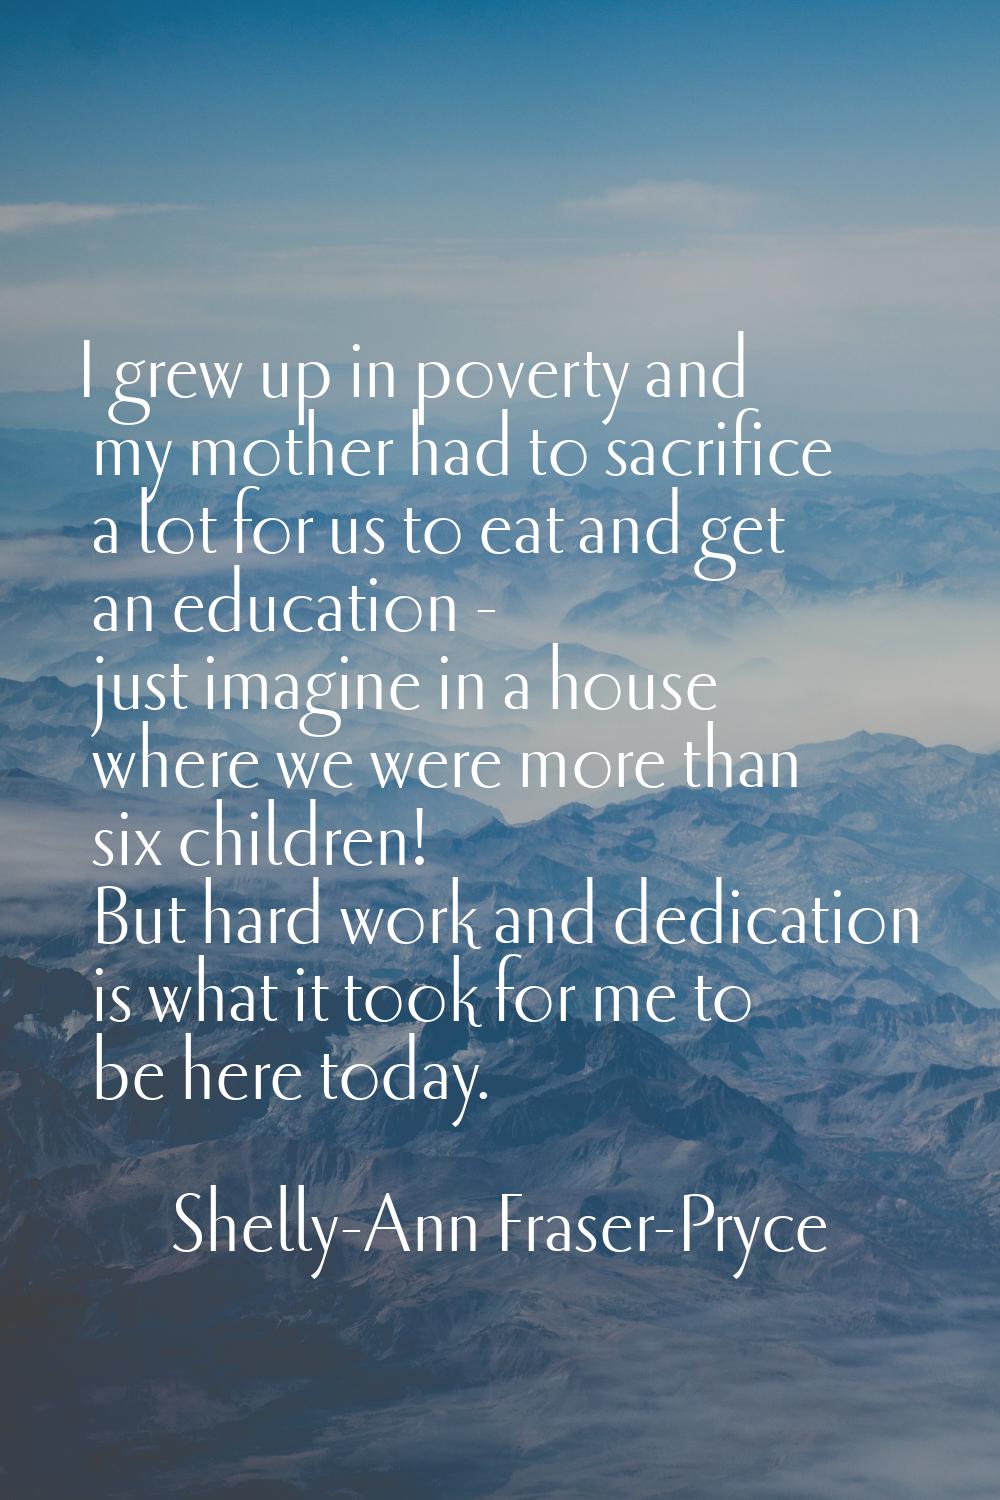 I grew up in poverty and my mother had to sacrifice a lot for us to eat and get an education - just